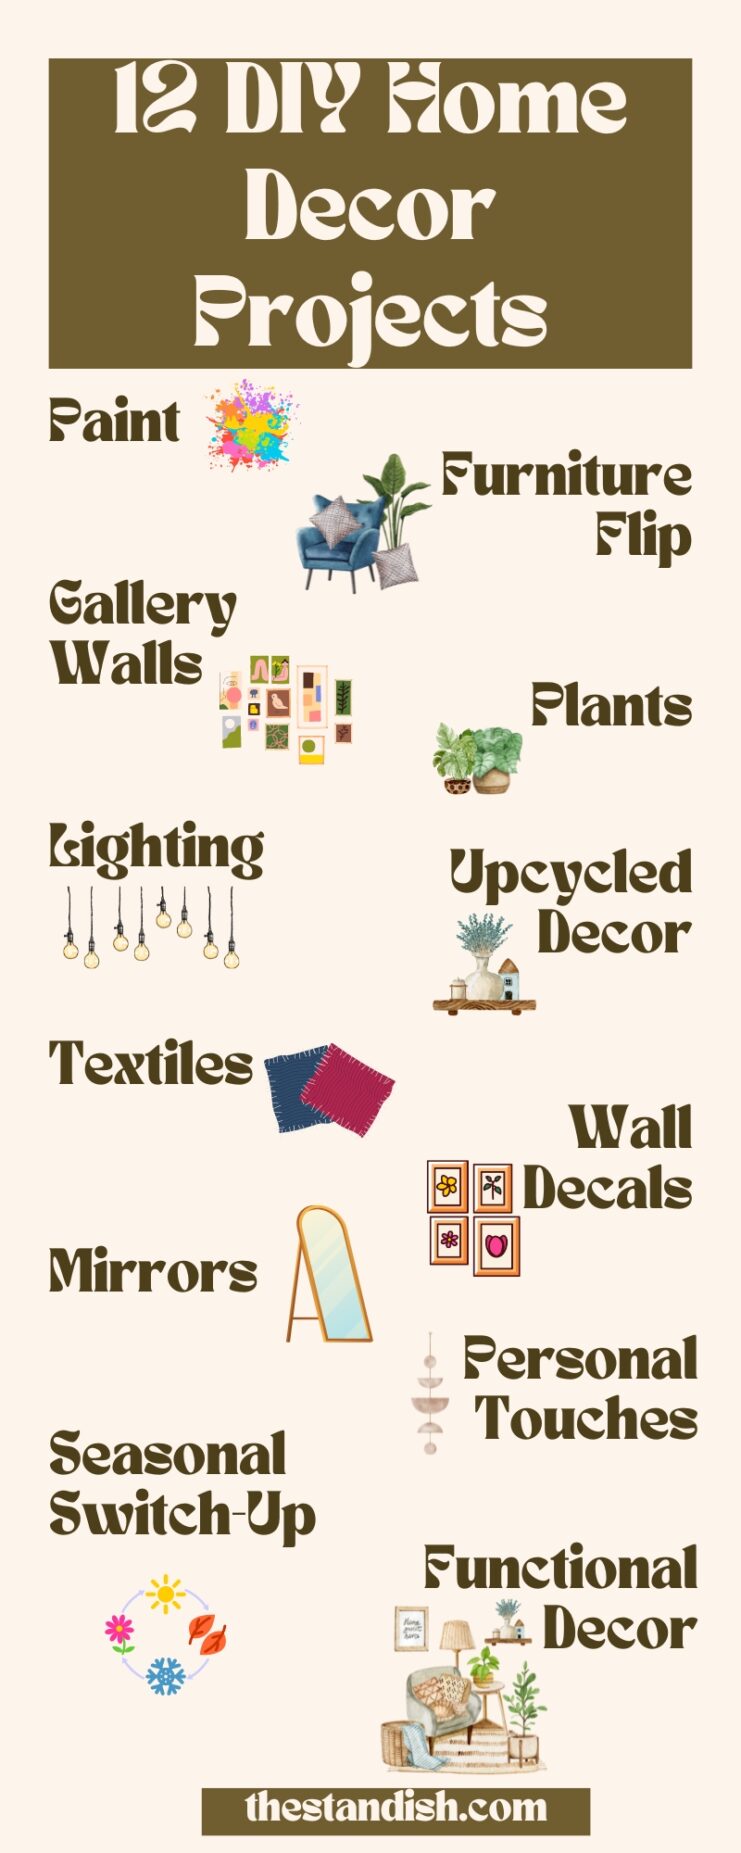 12 DIY Home Decor Projects Infographic